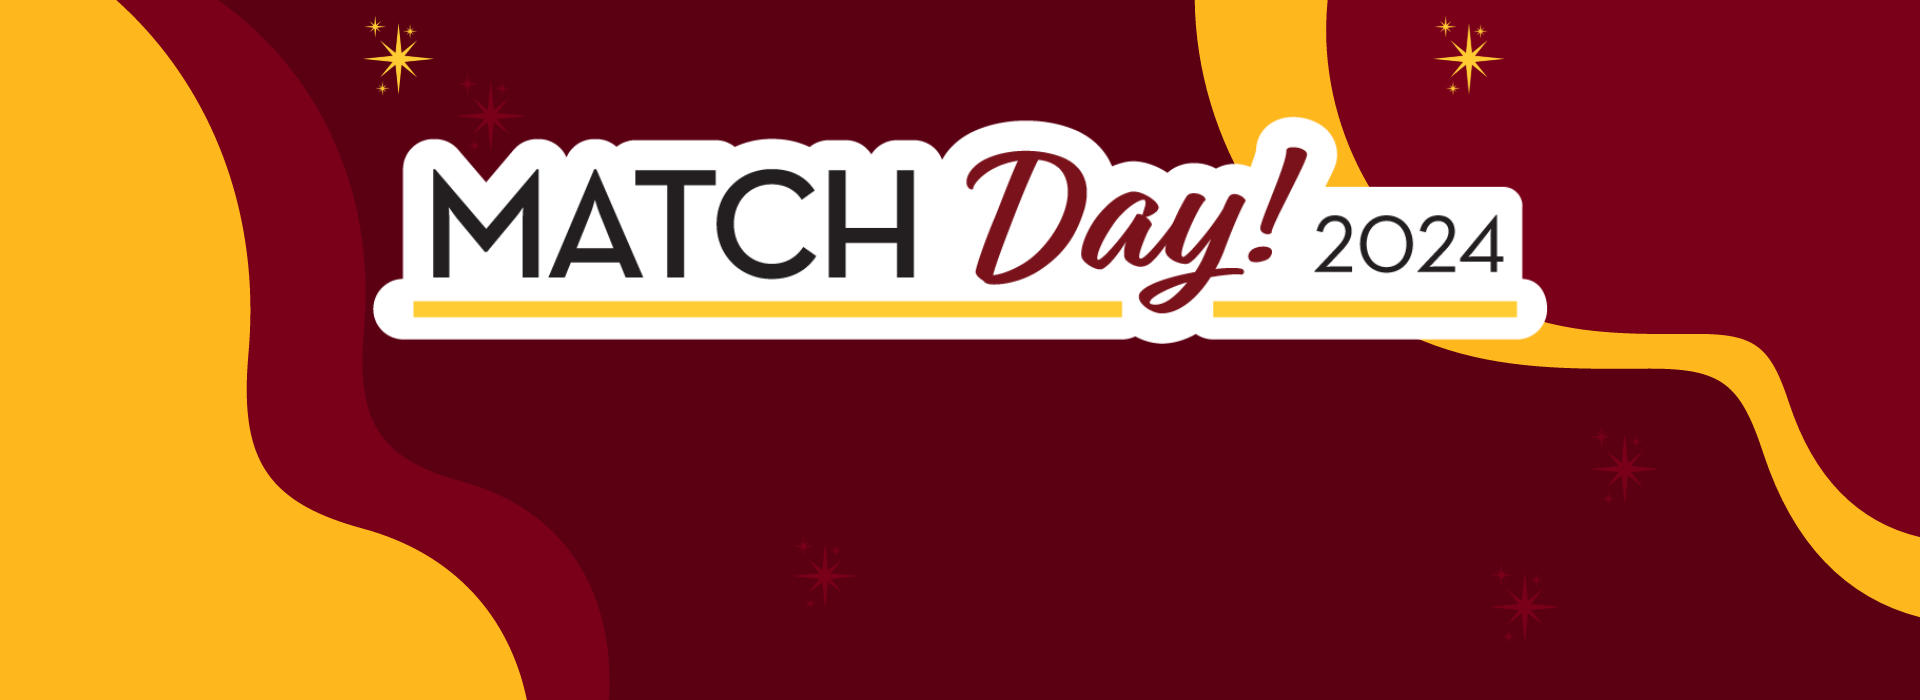 Match day graphic